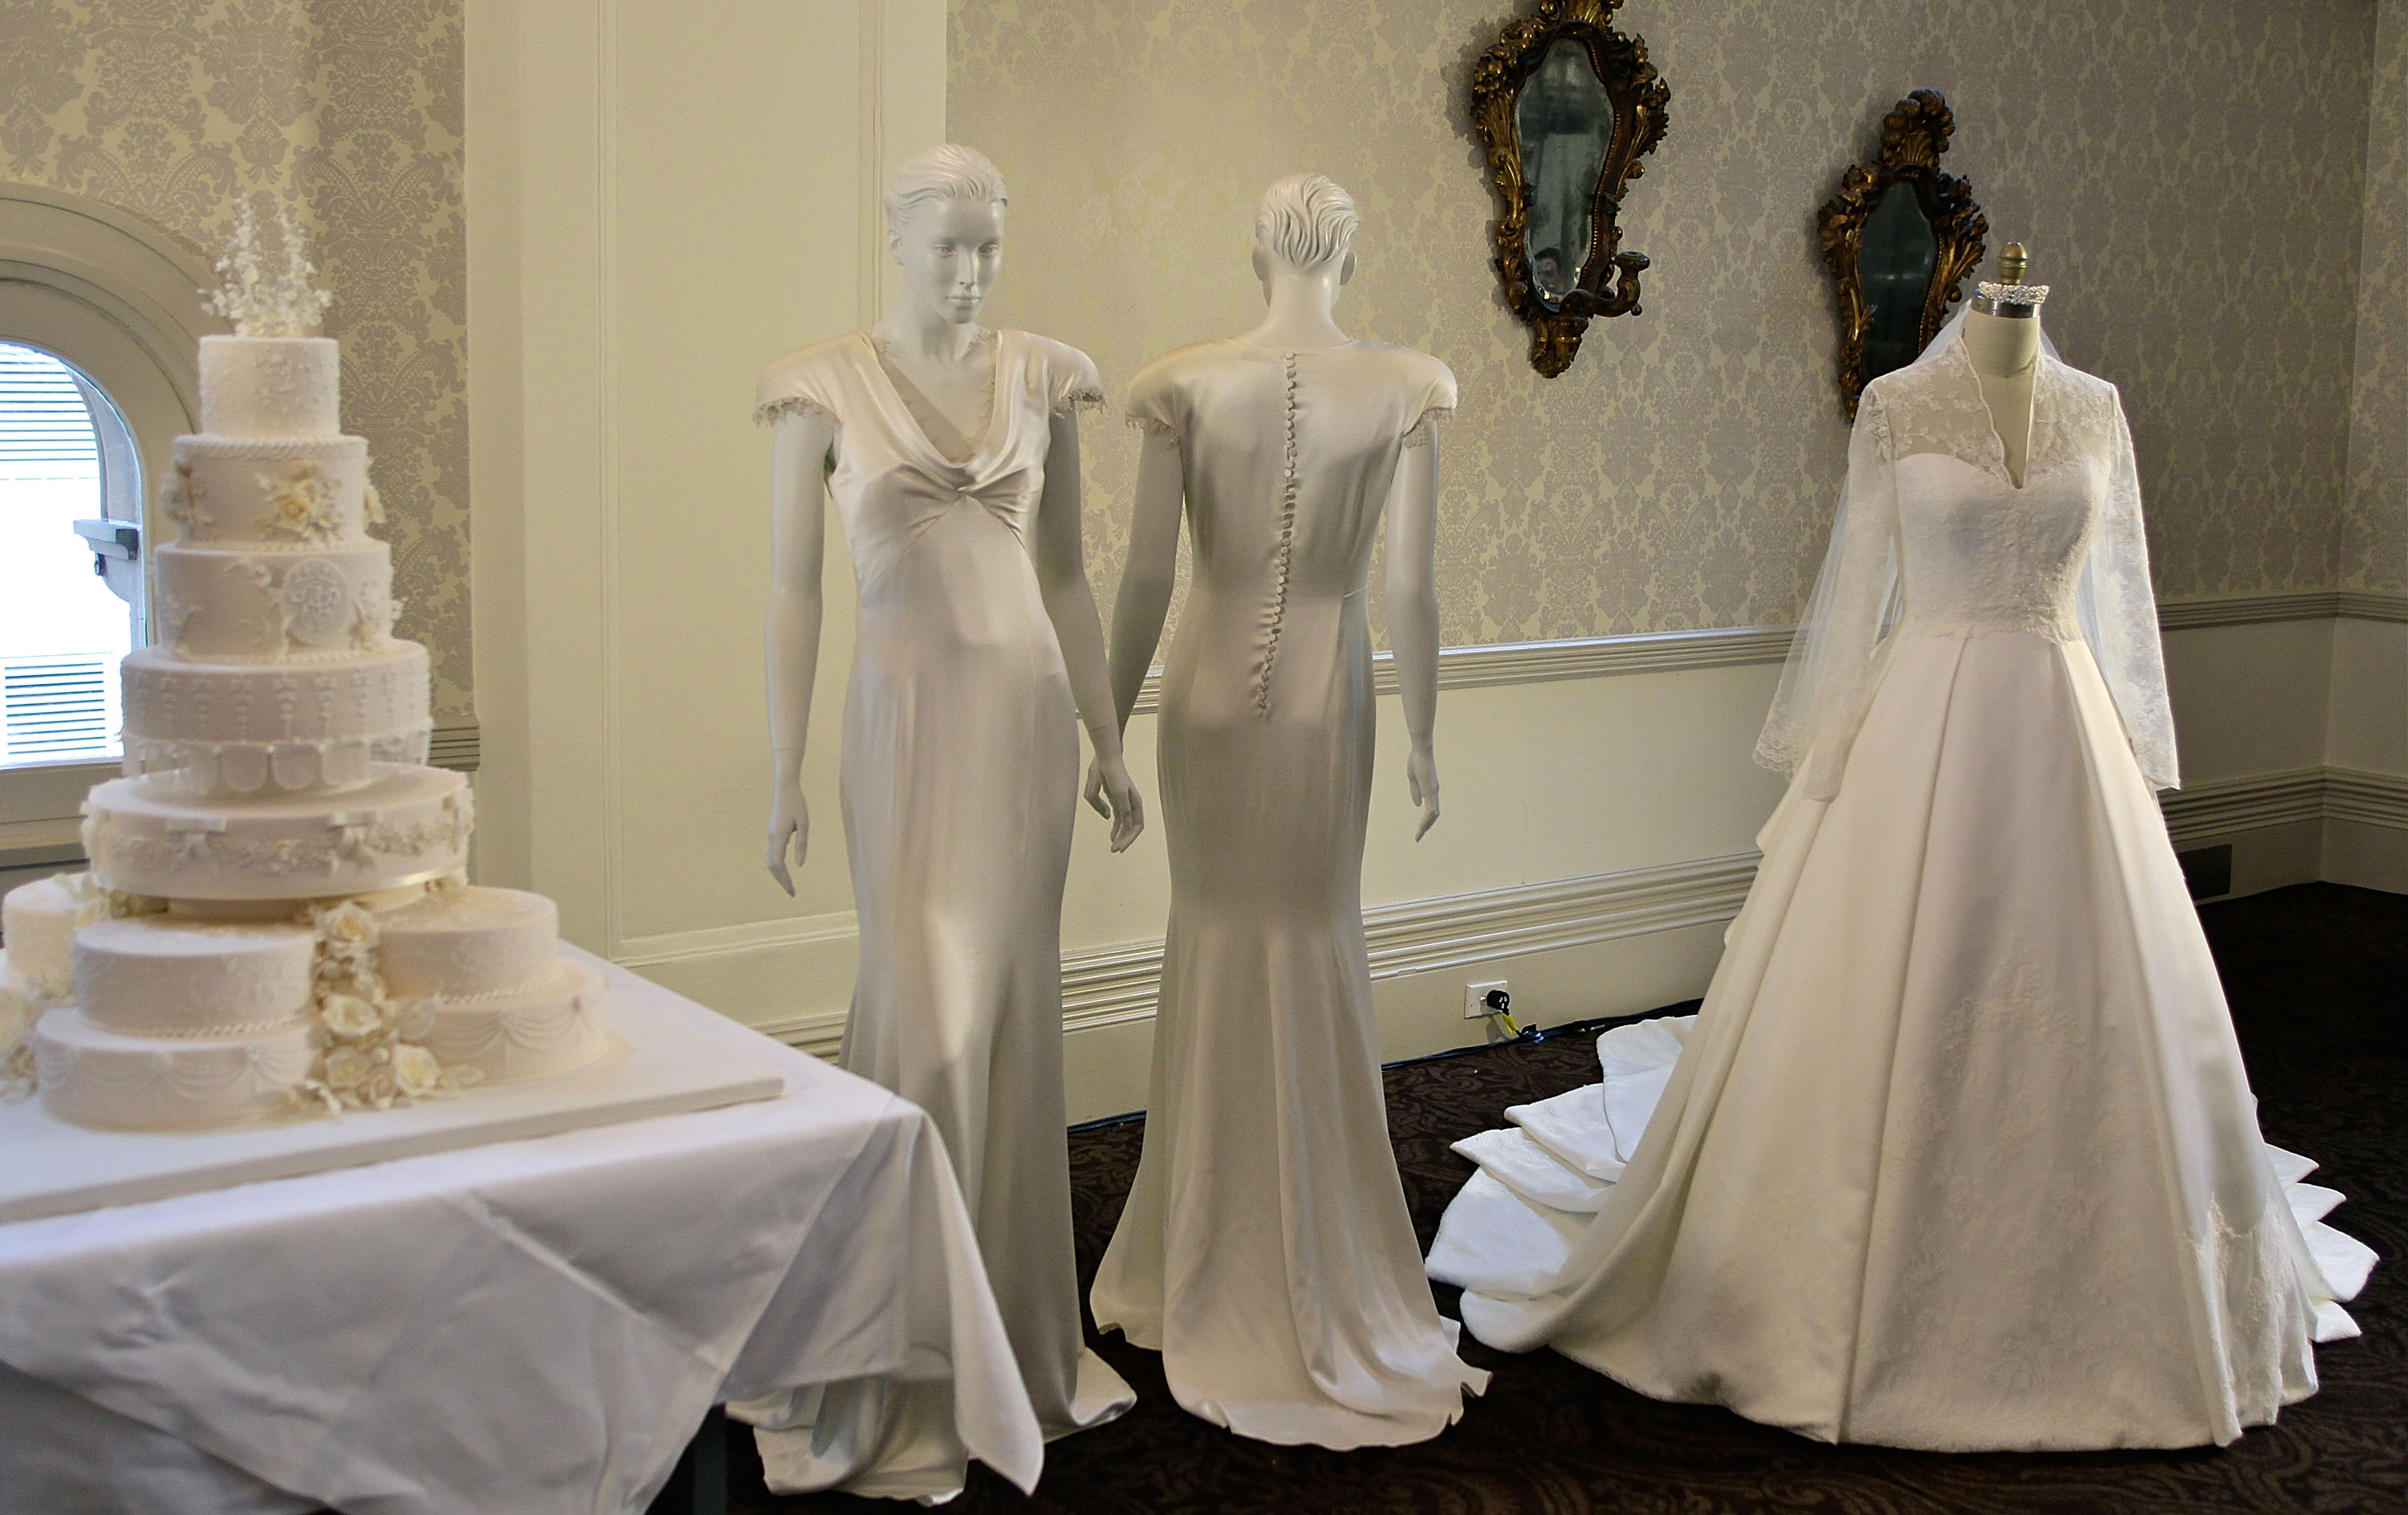 traditional white gowns worn by brides